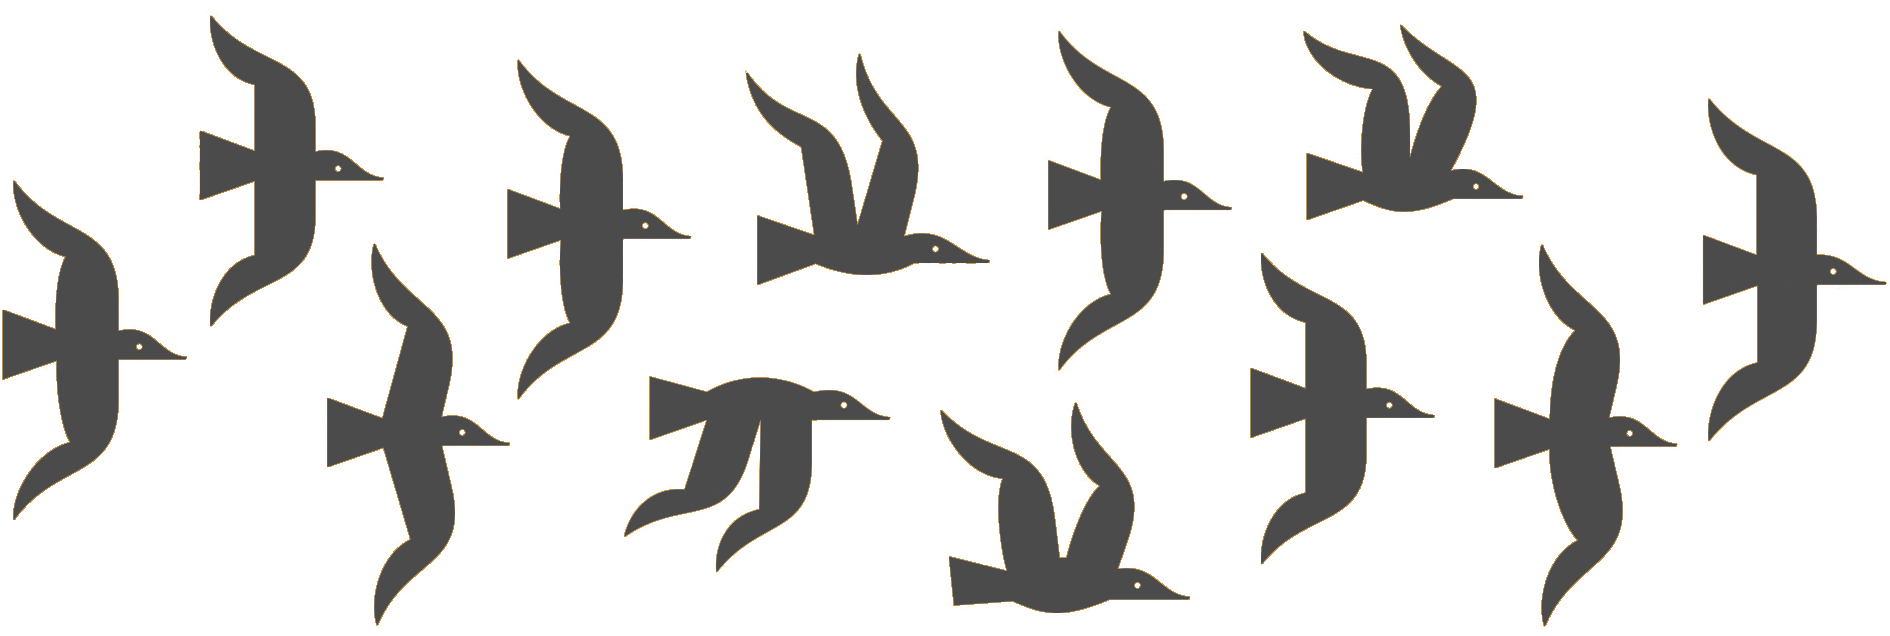 A group of 12 clipart birds flying towards the right